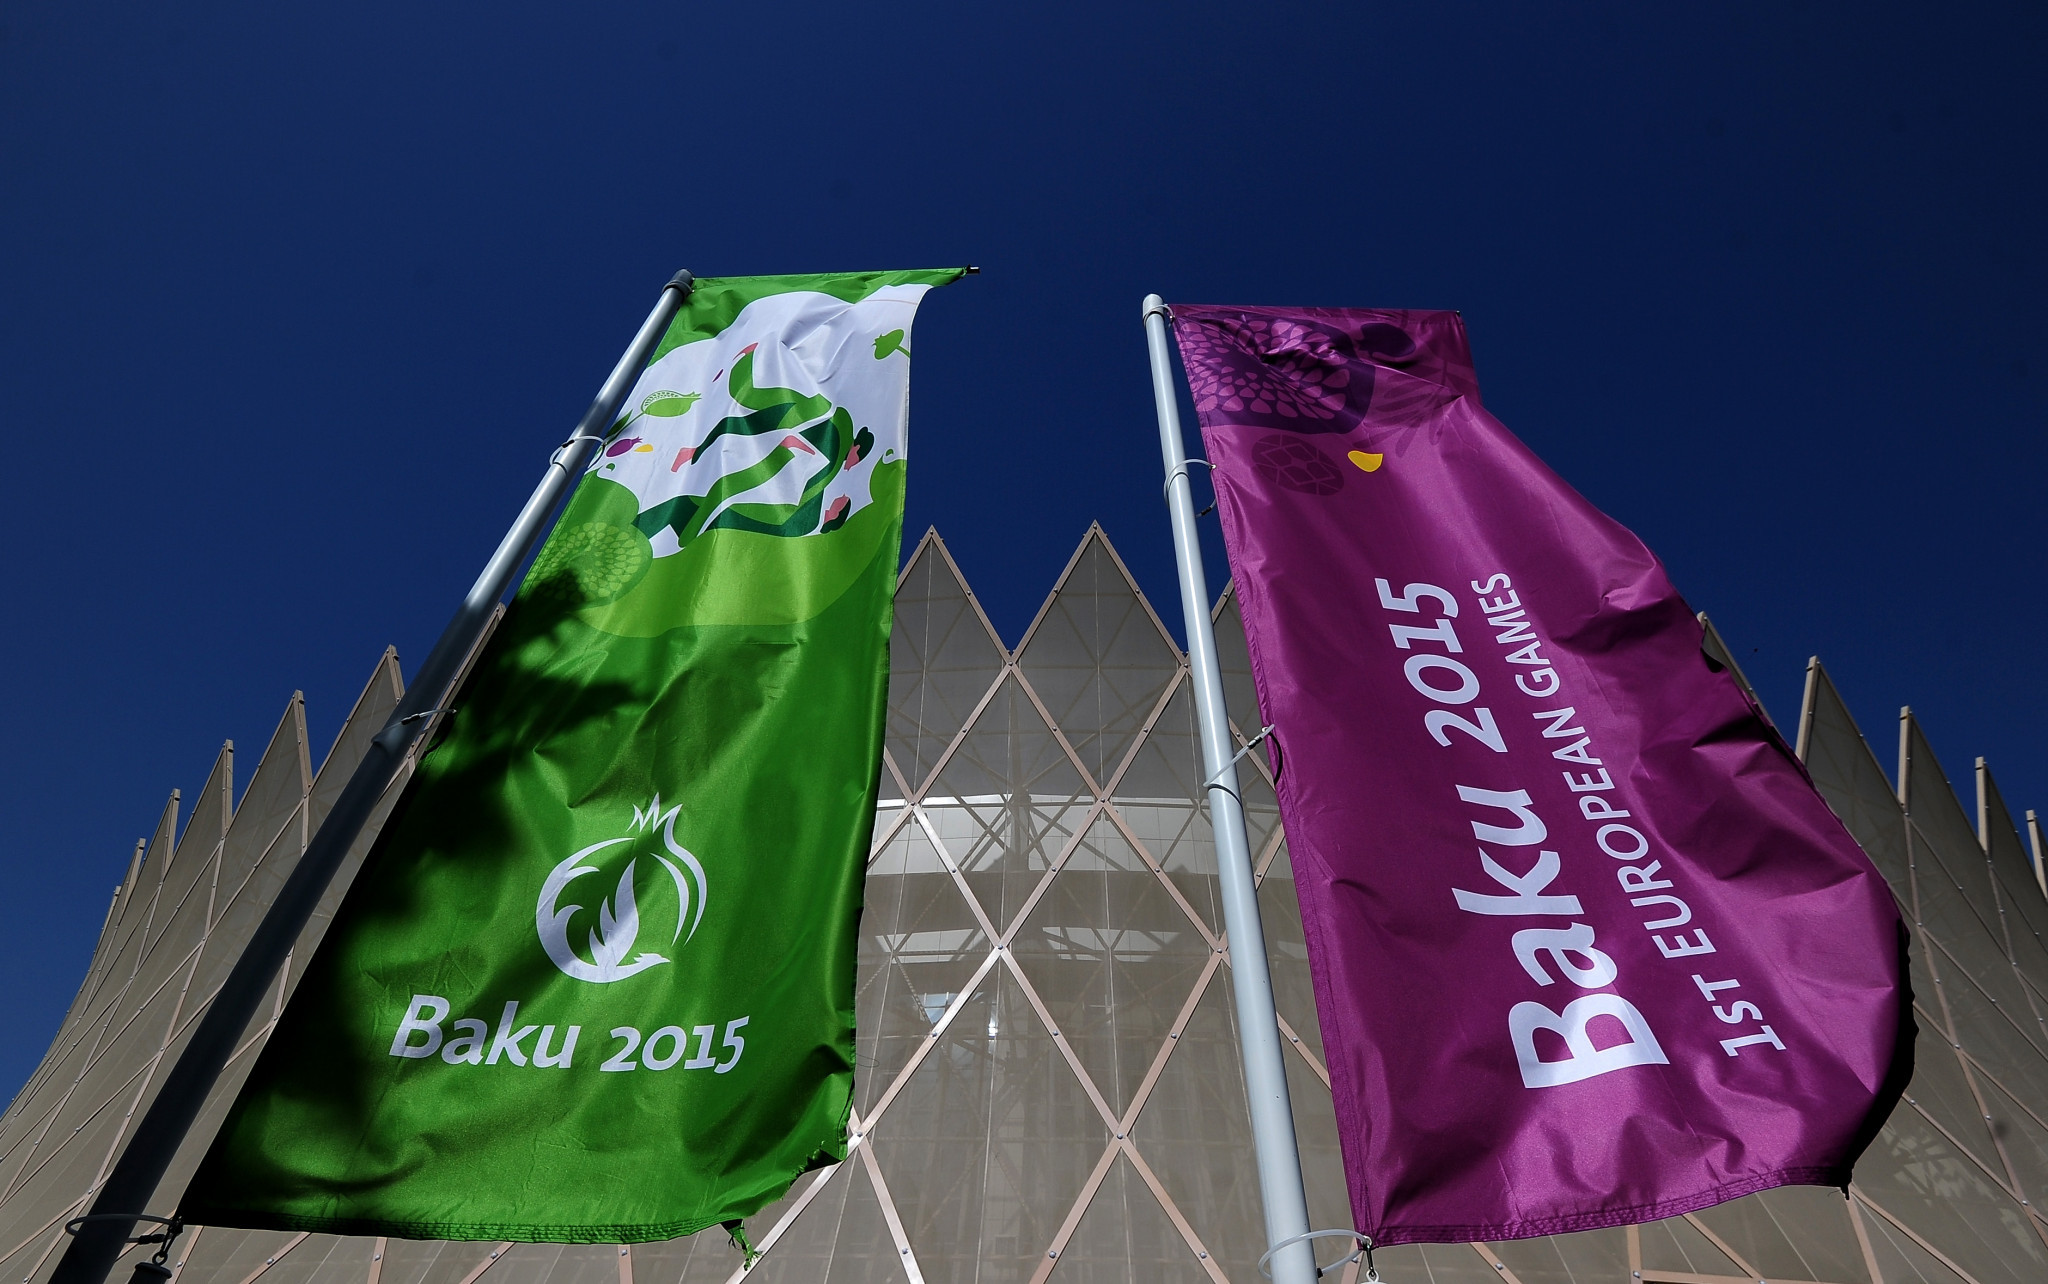 The arena was renovated for the Baku 2015 European Games and features a distinctive sharp-edged top ©Getty Images